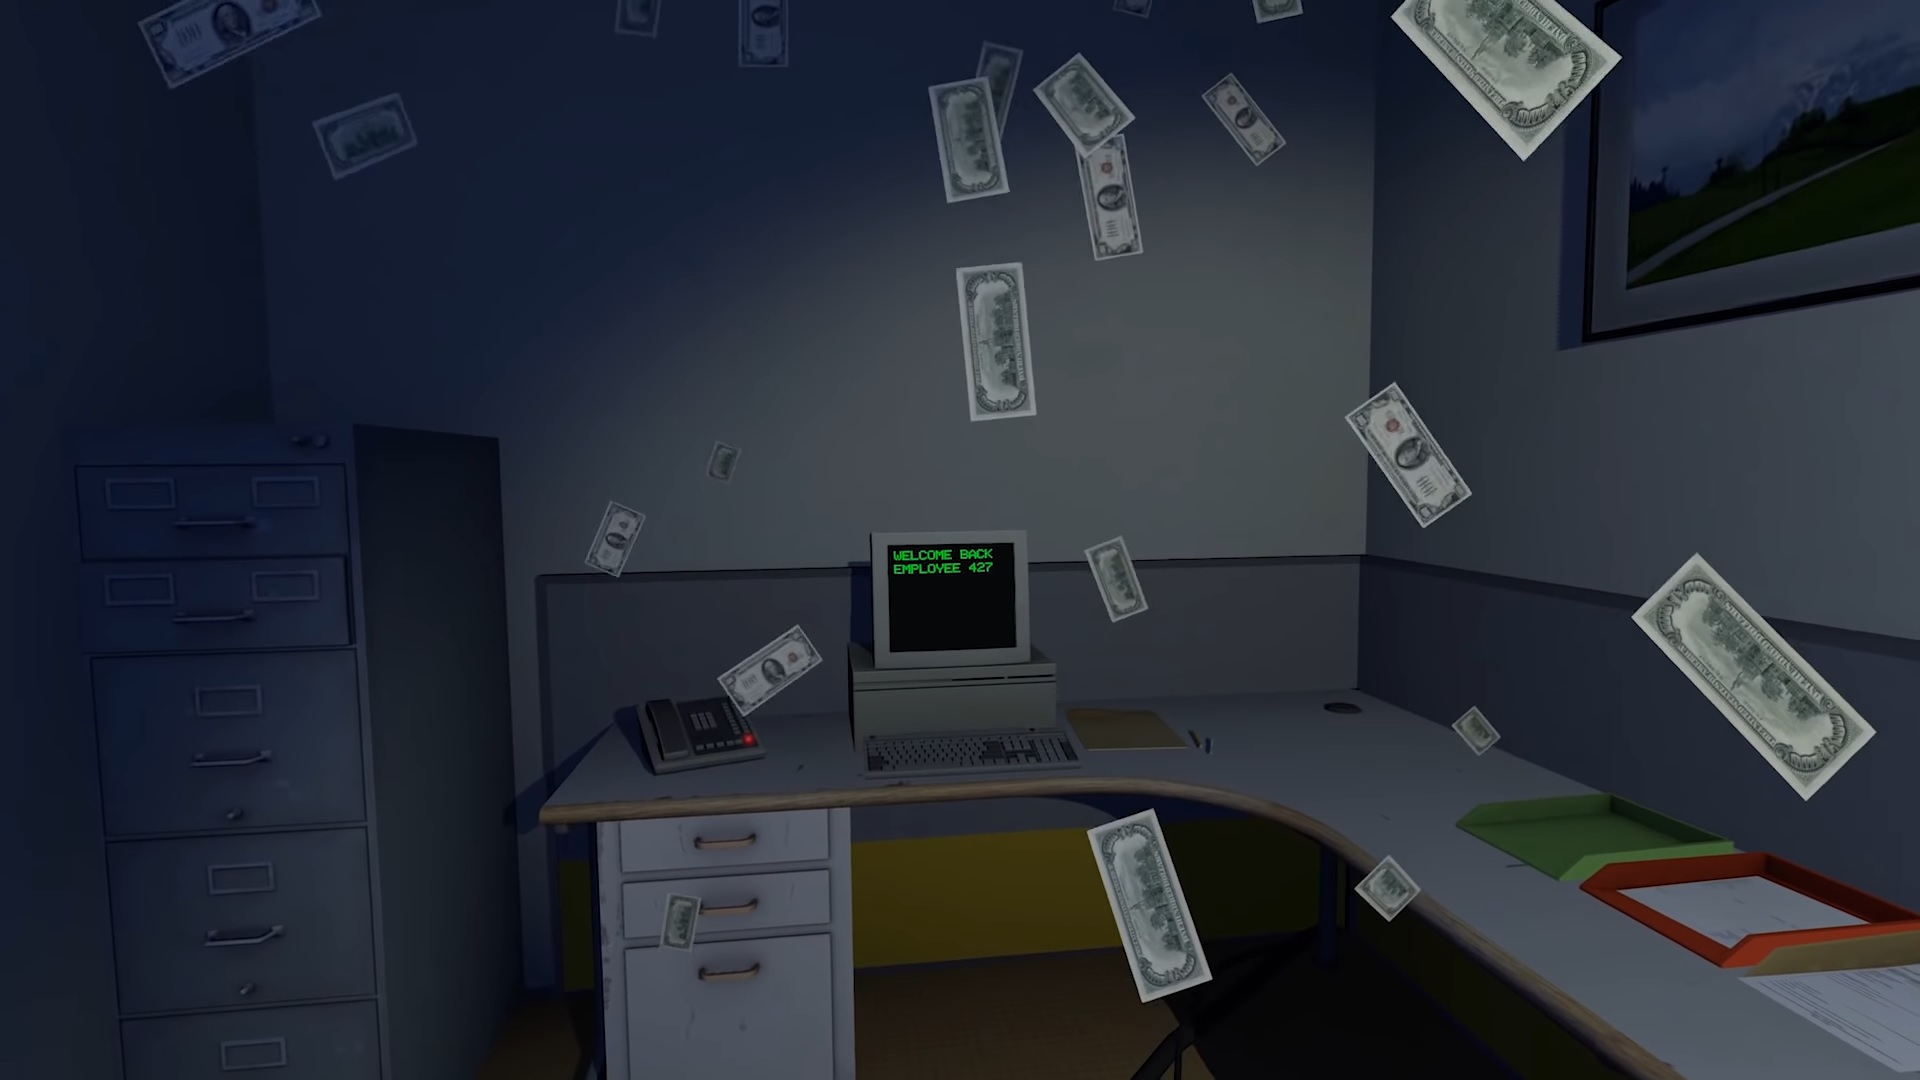 Stanley parable ultra. The Stanley Parable. The Stanley Parable: Ultra Deluxe. The Stanley Parable Ultra Deluxe ведро. Классные игры на компьютер с другом.